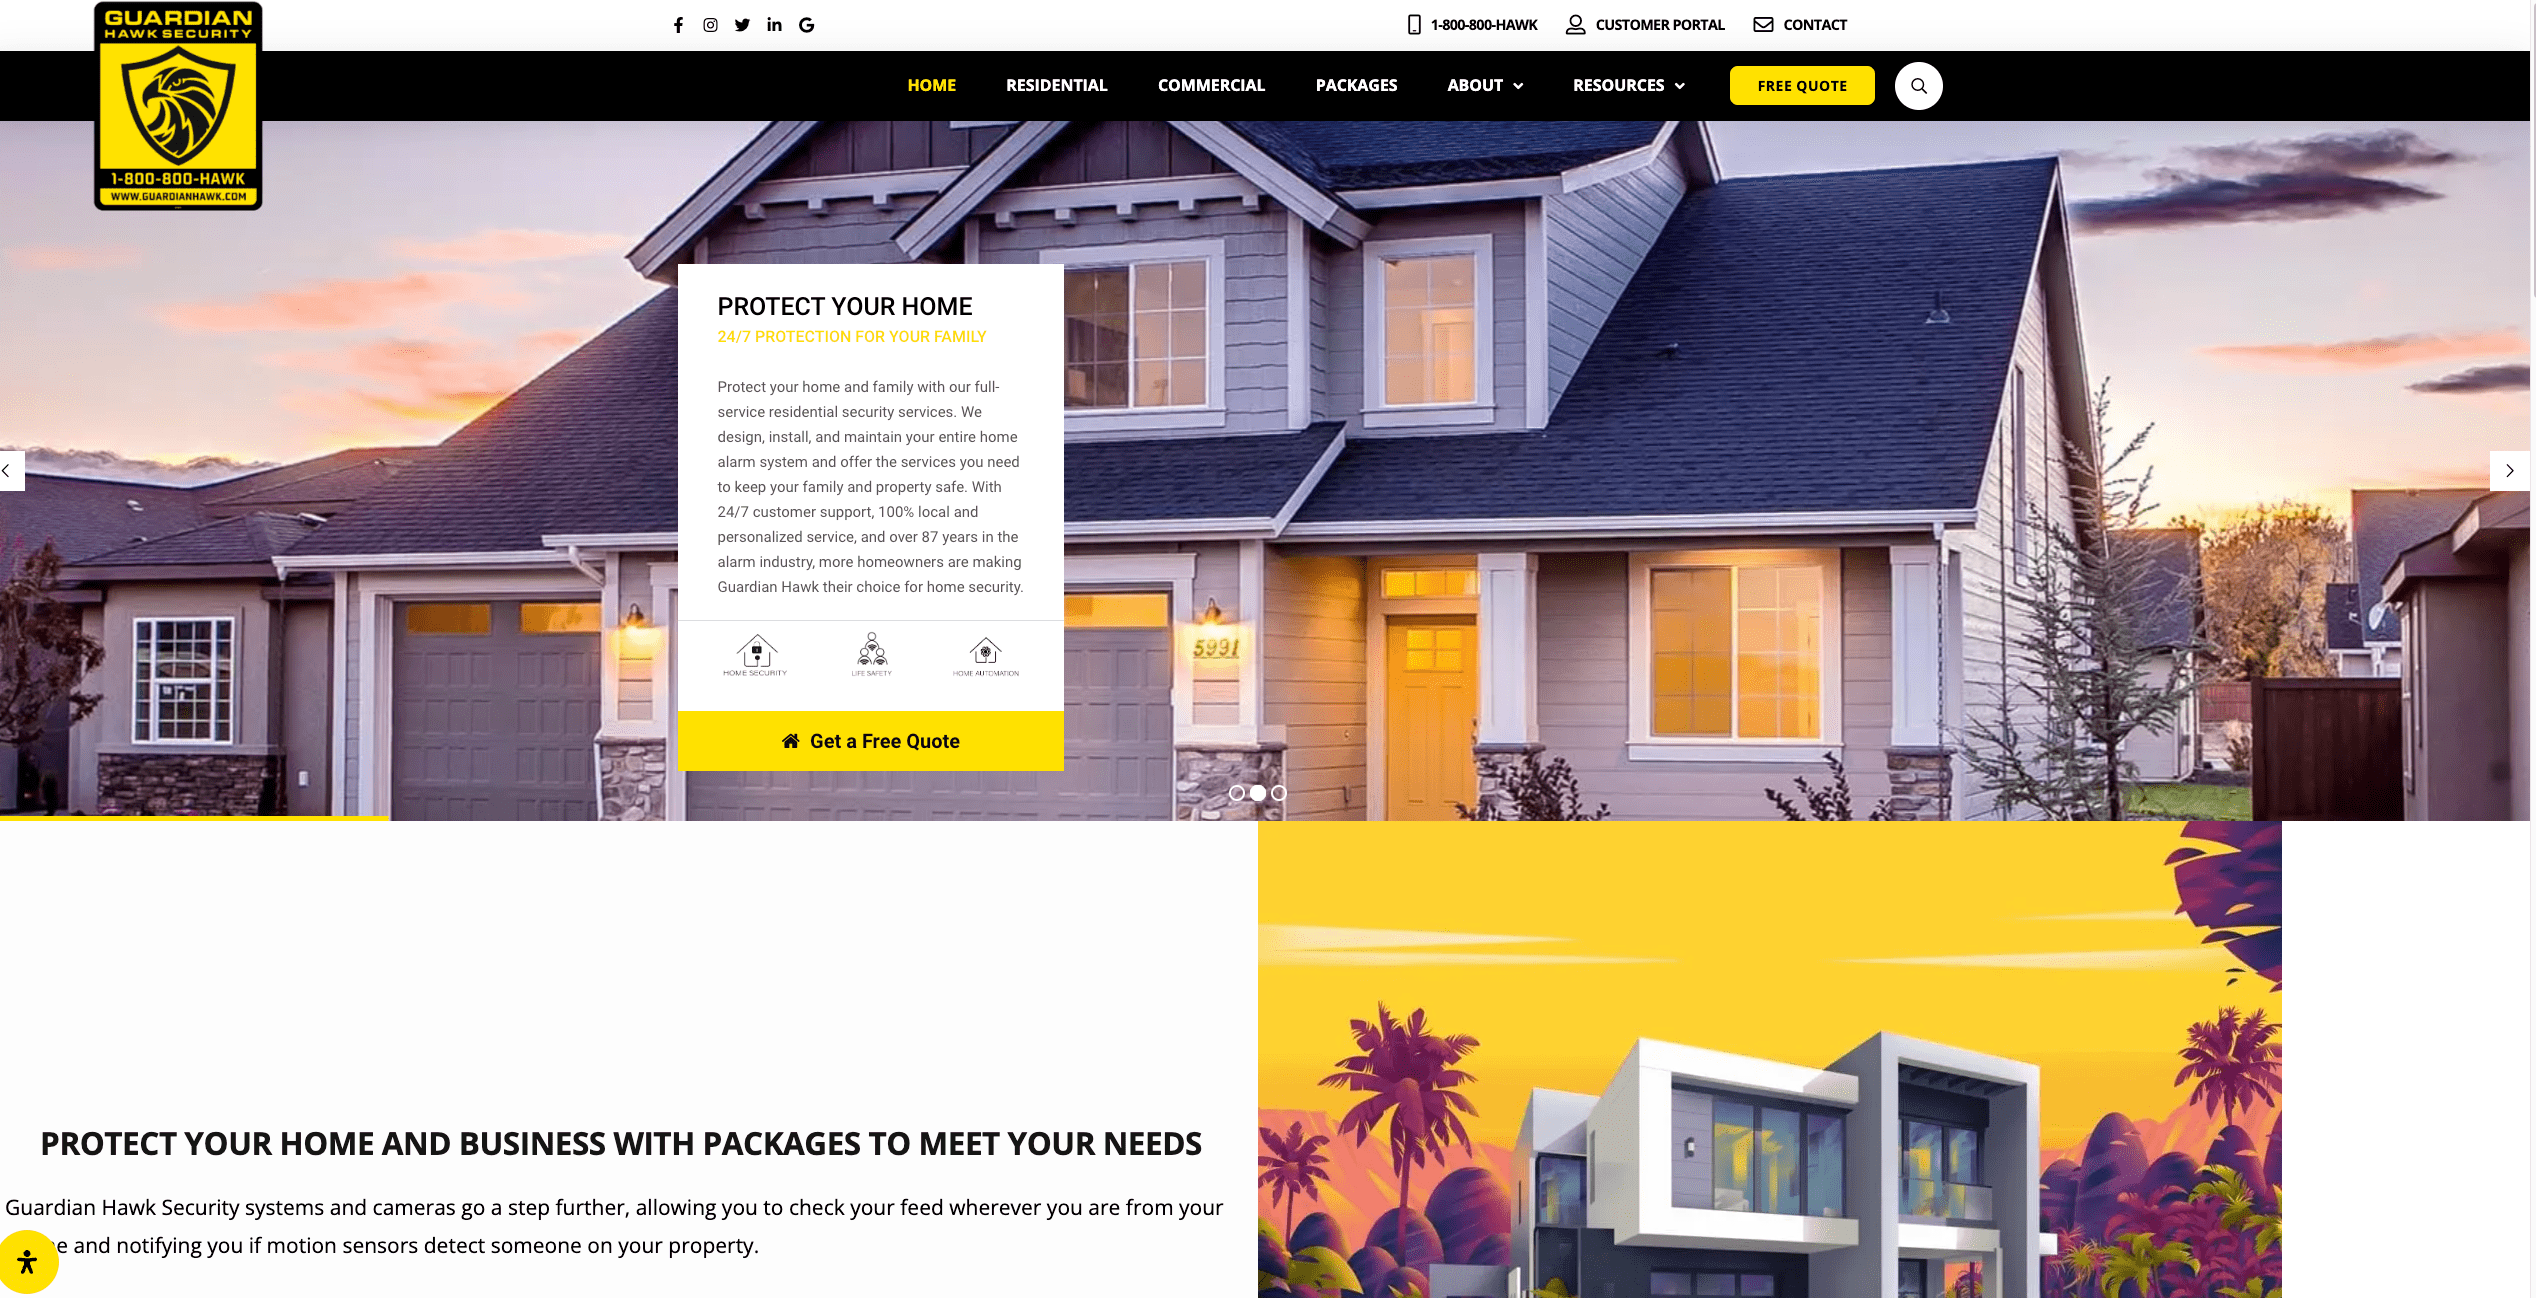 Homepage of a security company:

- Gray house image with "Protect Your Home" section
- Options to get a free quote

Below:
- Yellow graphic for Guardian home security packages